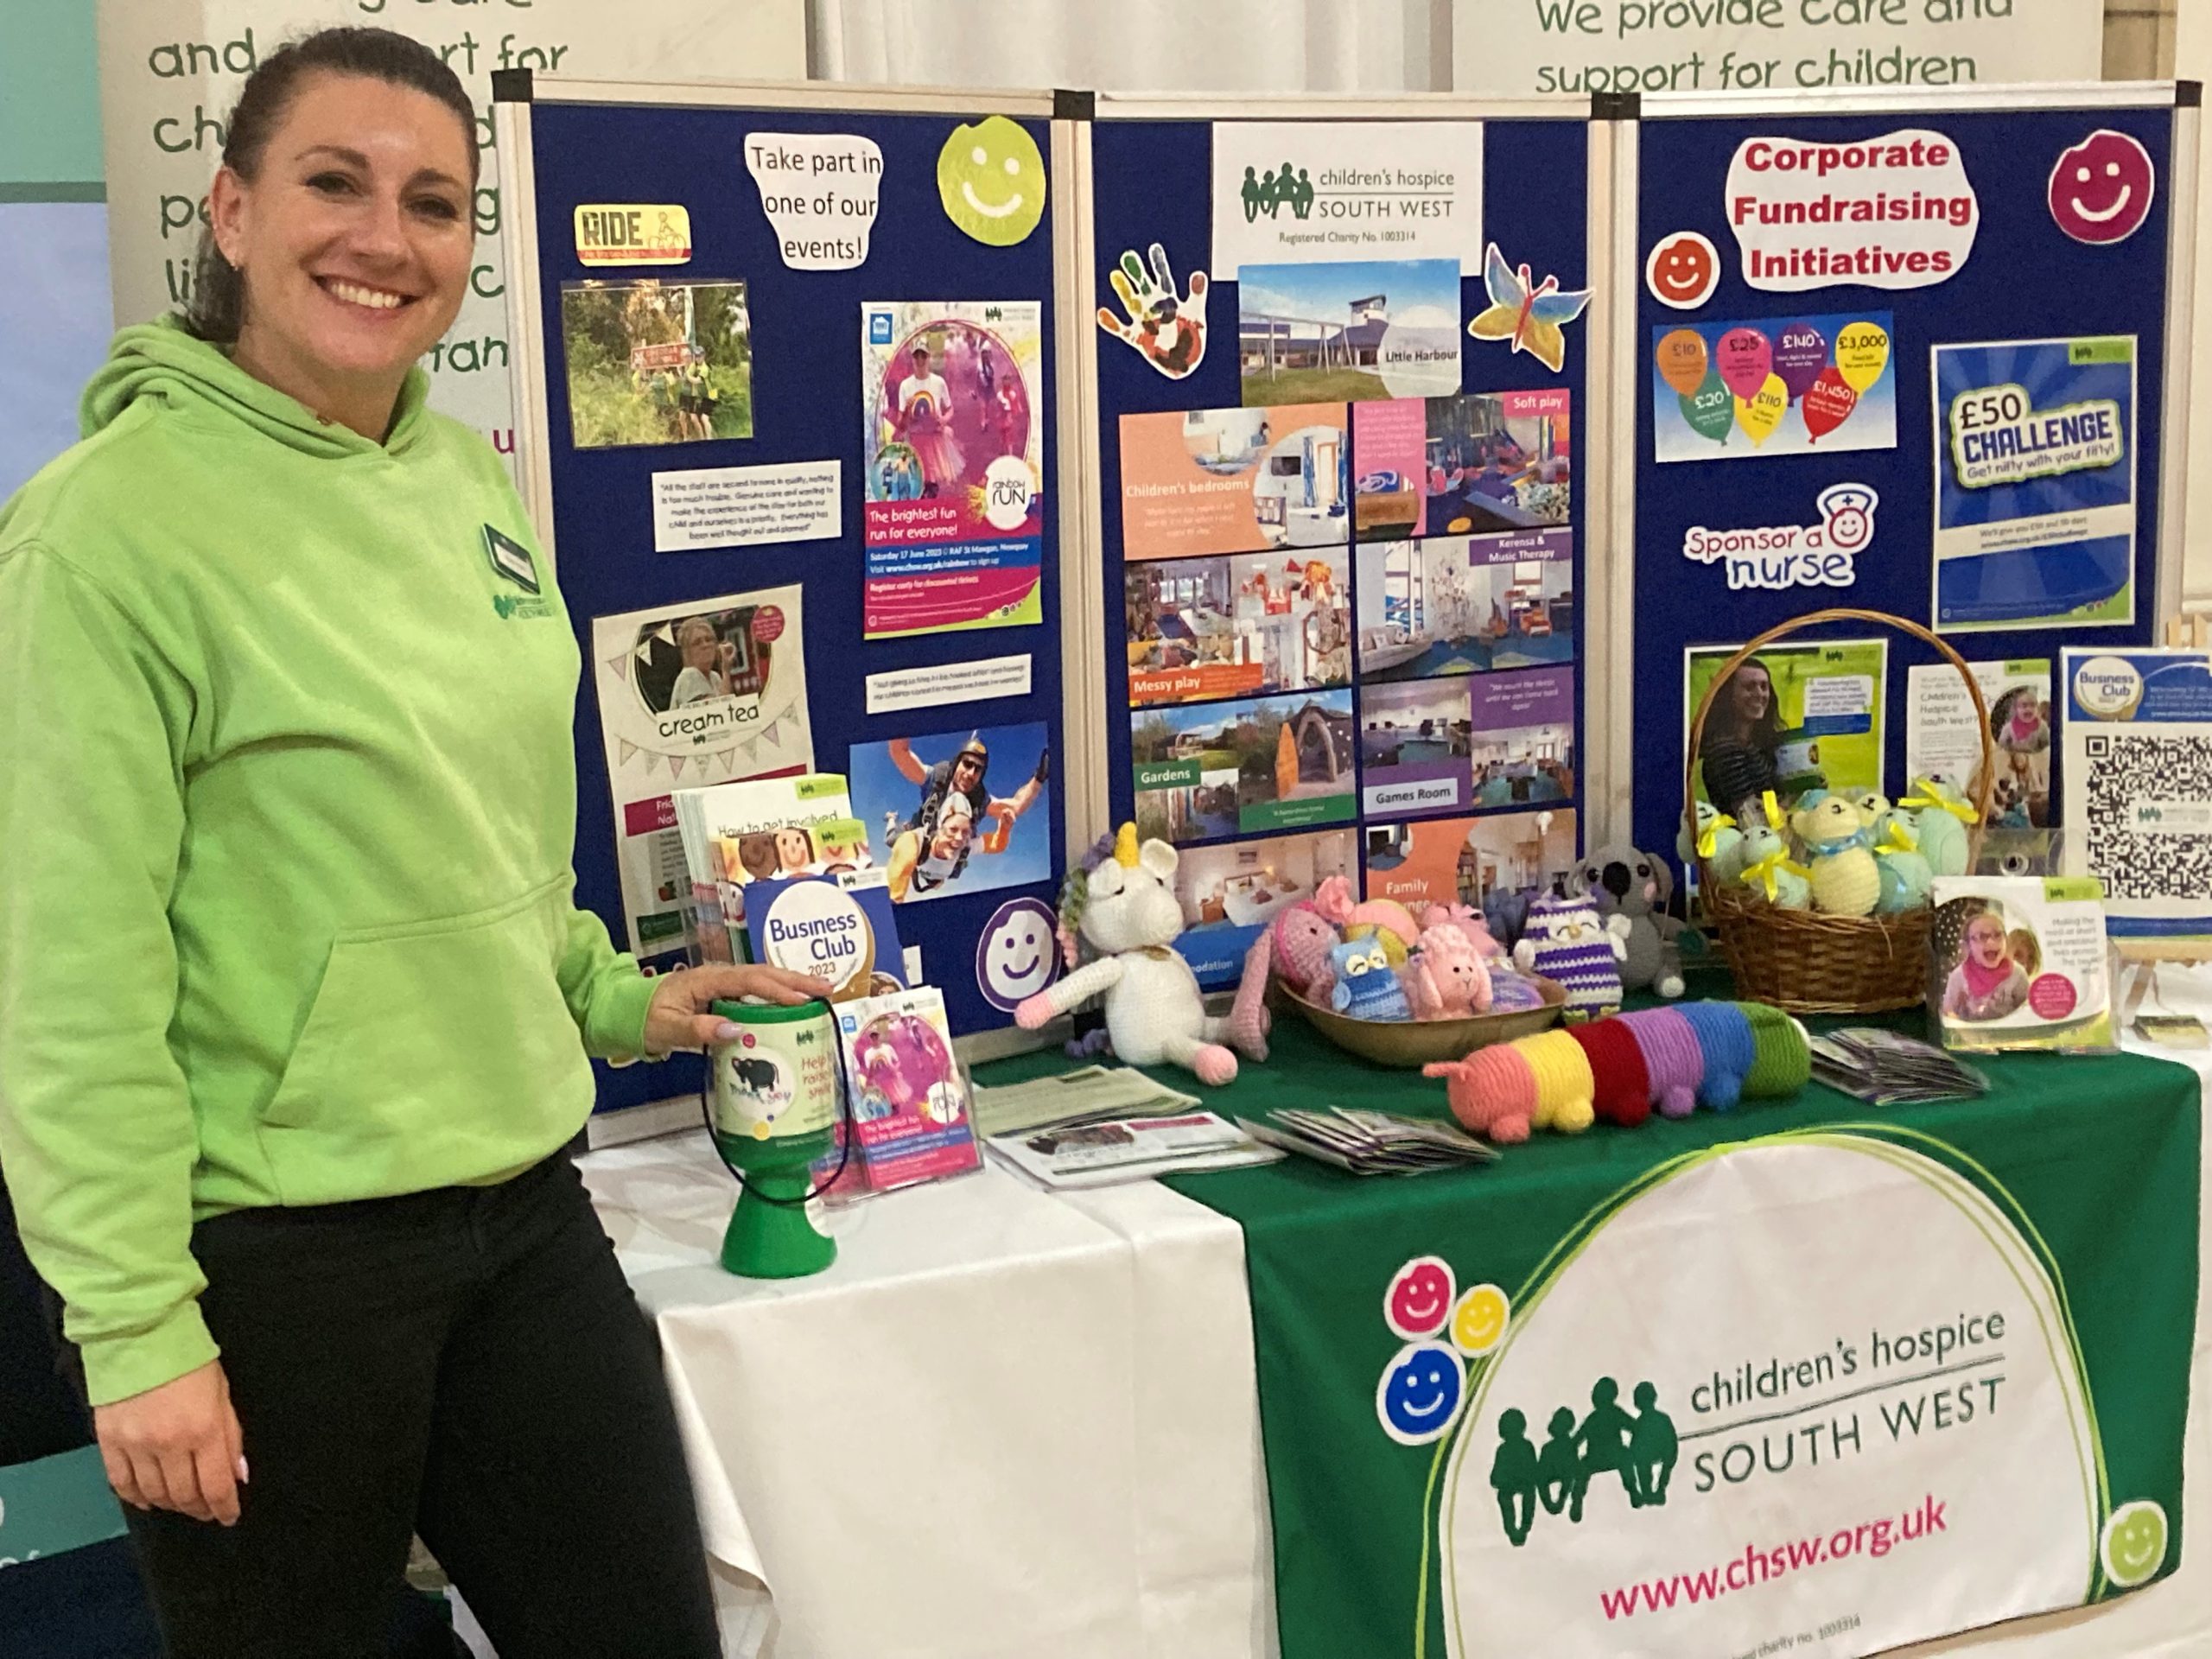 Amanda from Children's Hospice South West in green hoodie stood by her stall with money pot, posters, knitted toys